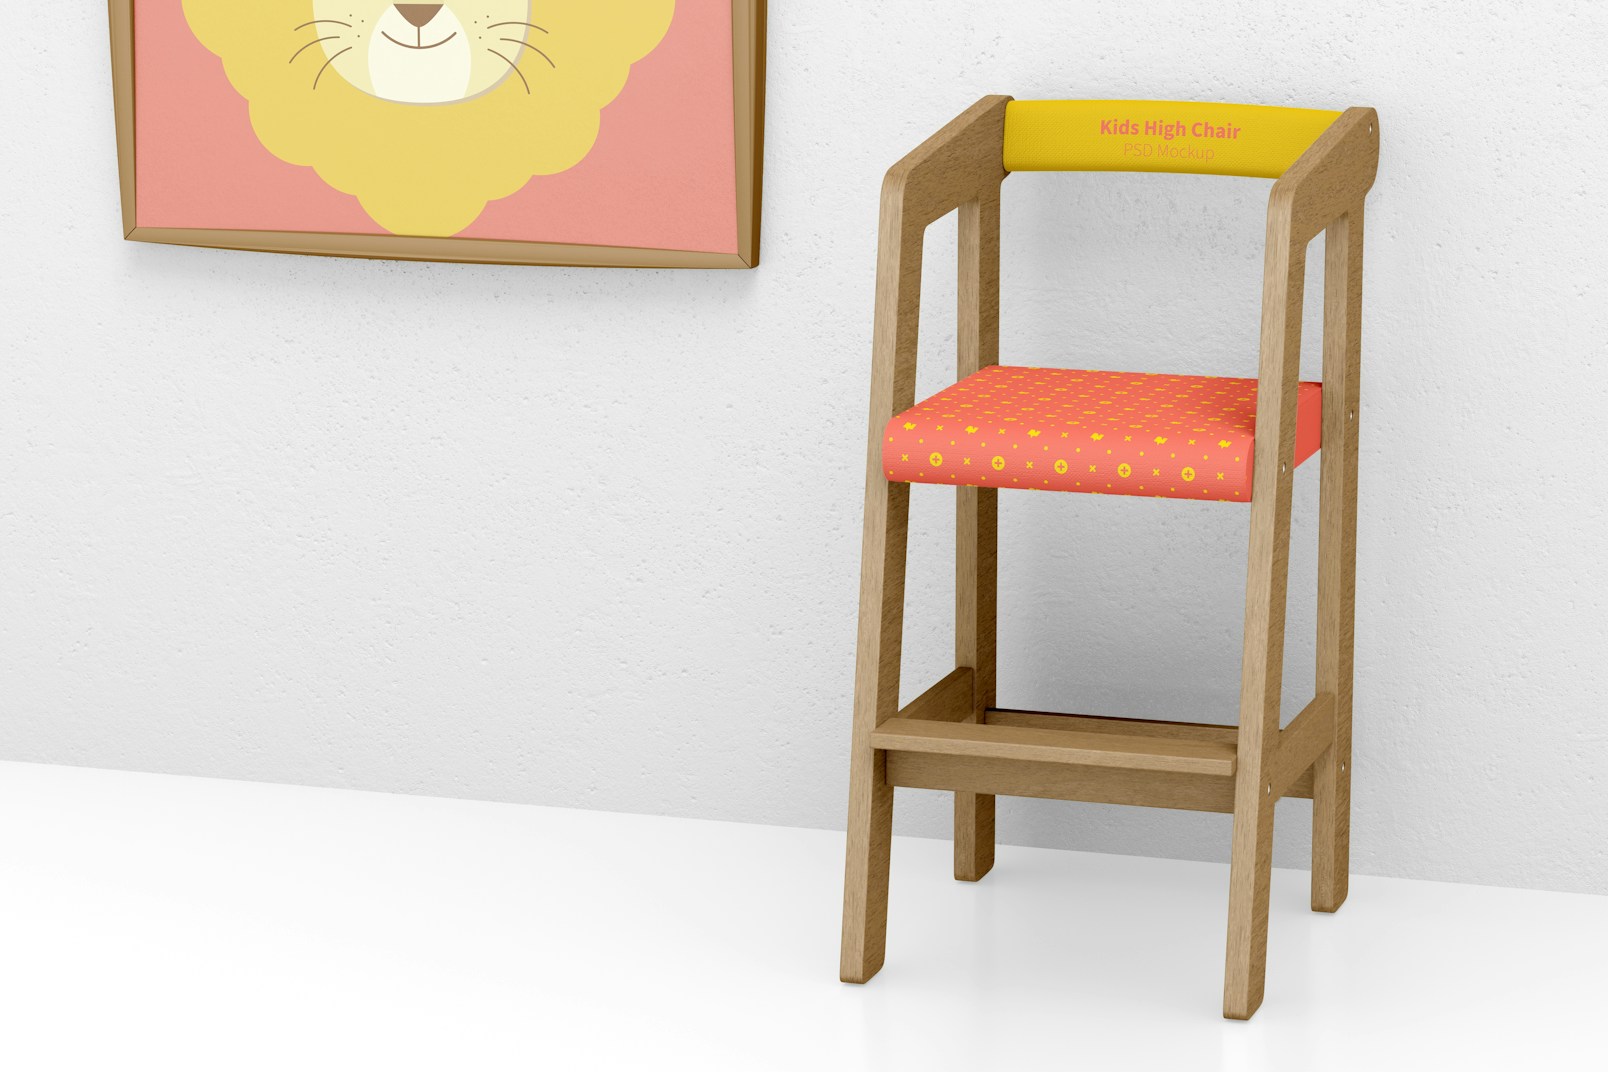 Kids High Chair Mockup, Perspective